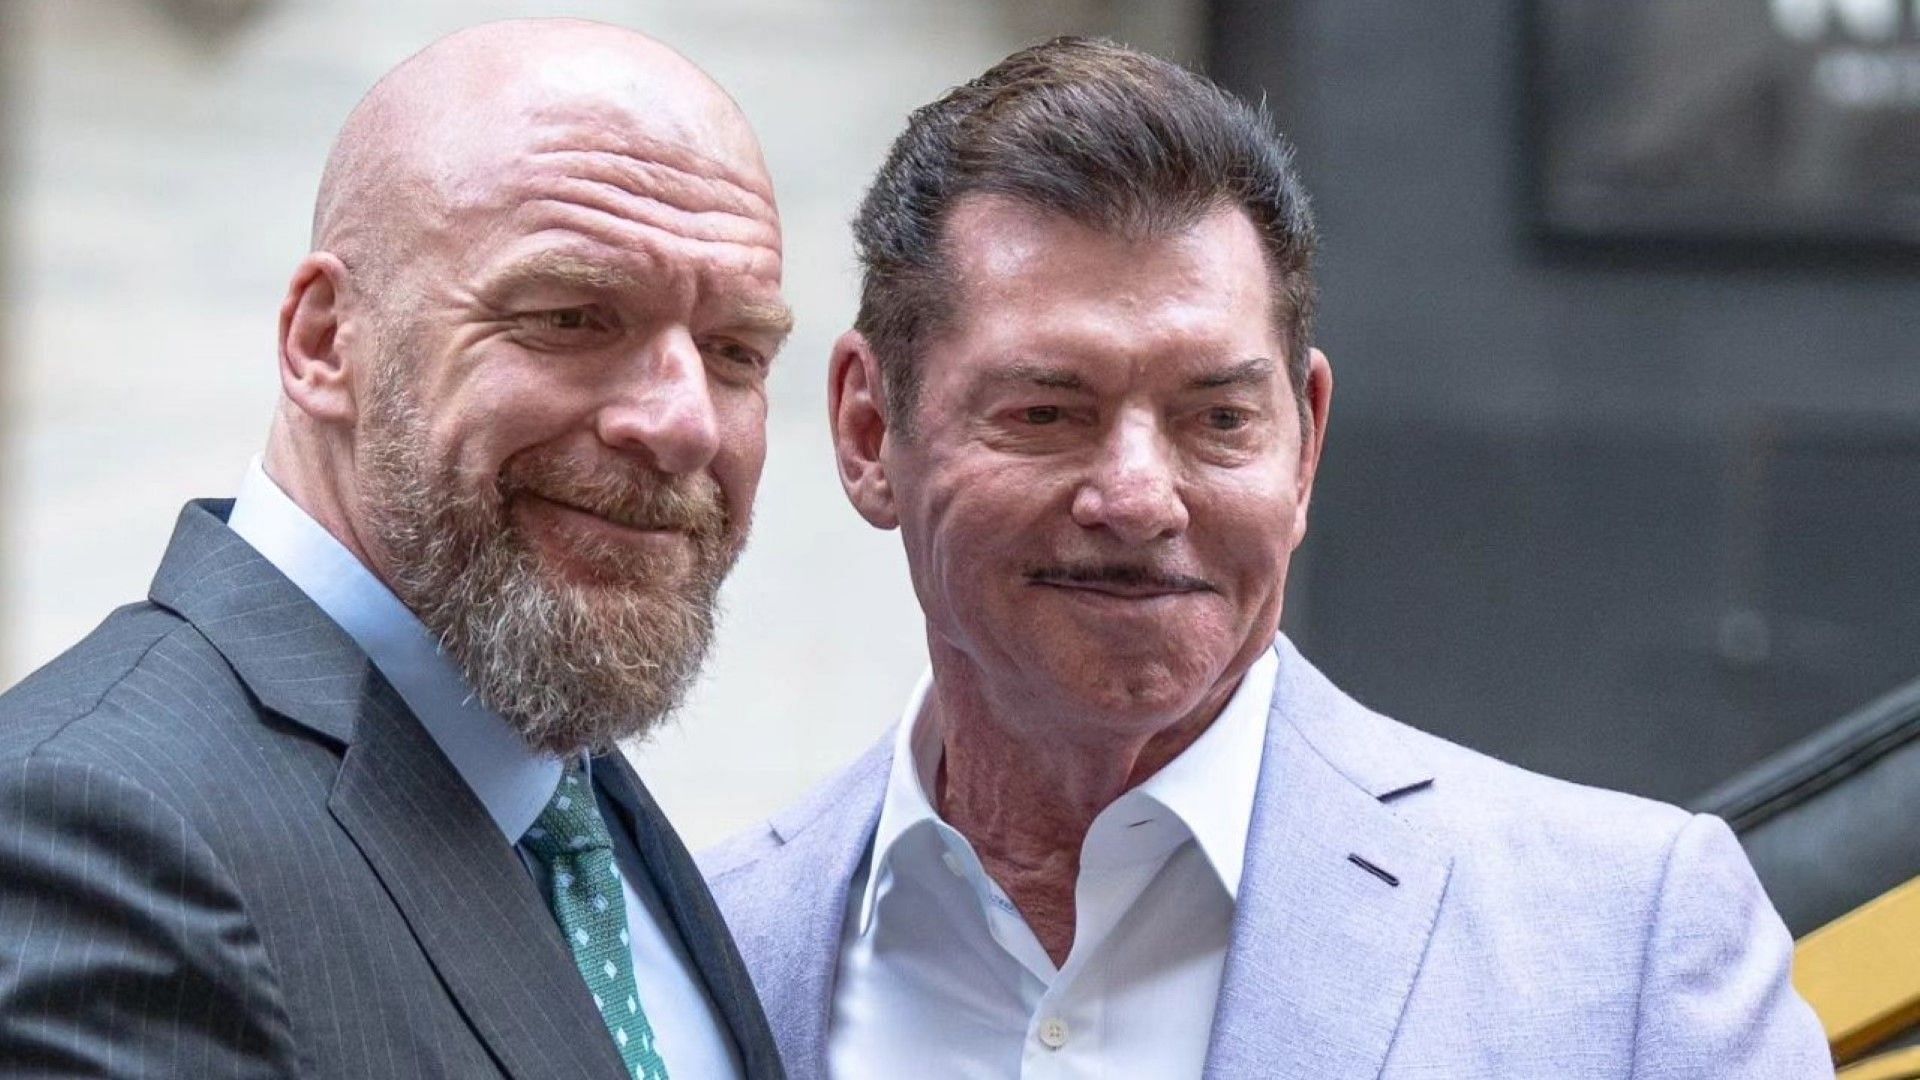 Triple H and Vince McMahon pose together at the TKO launch